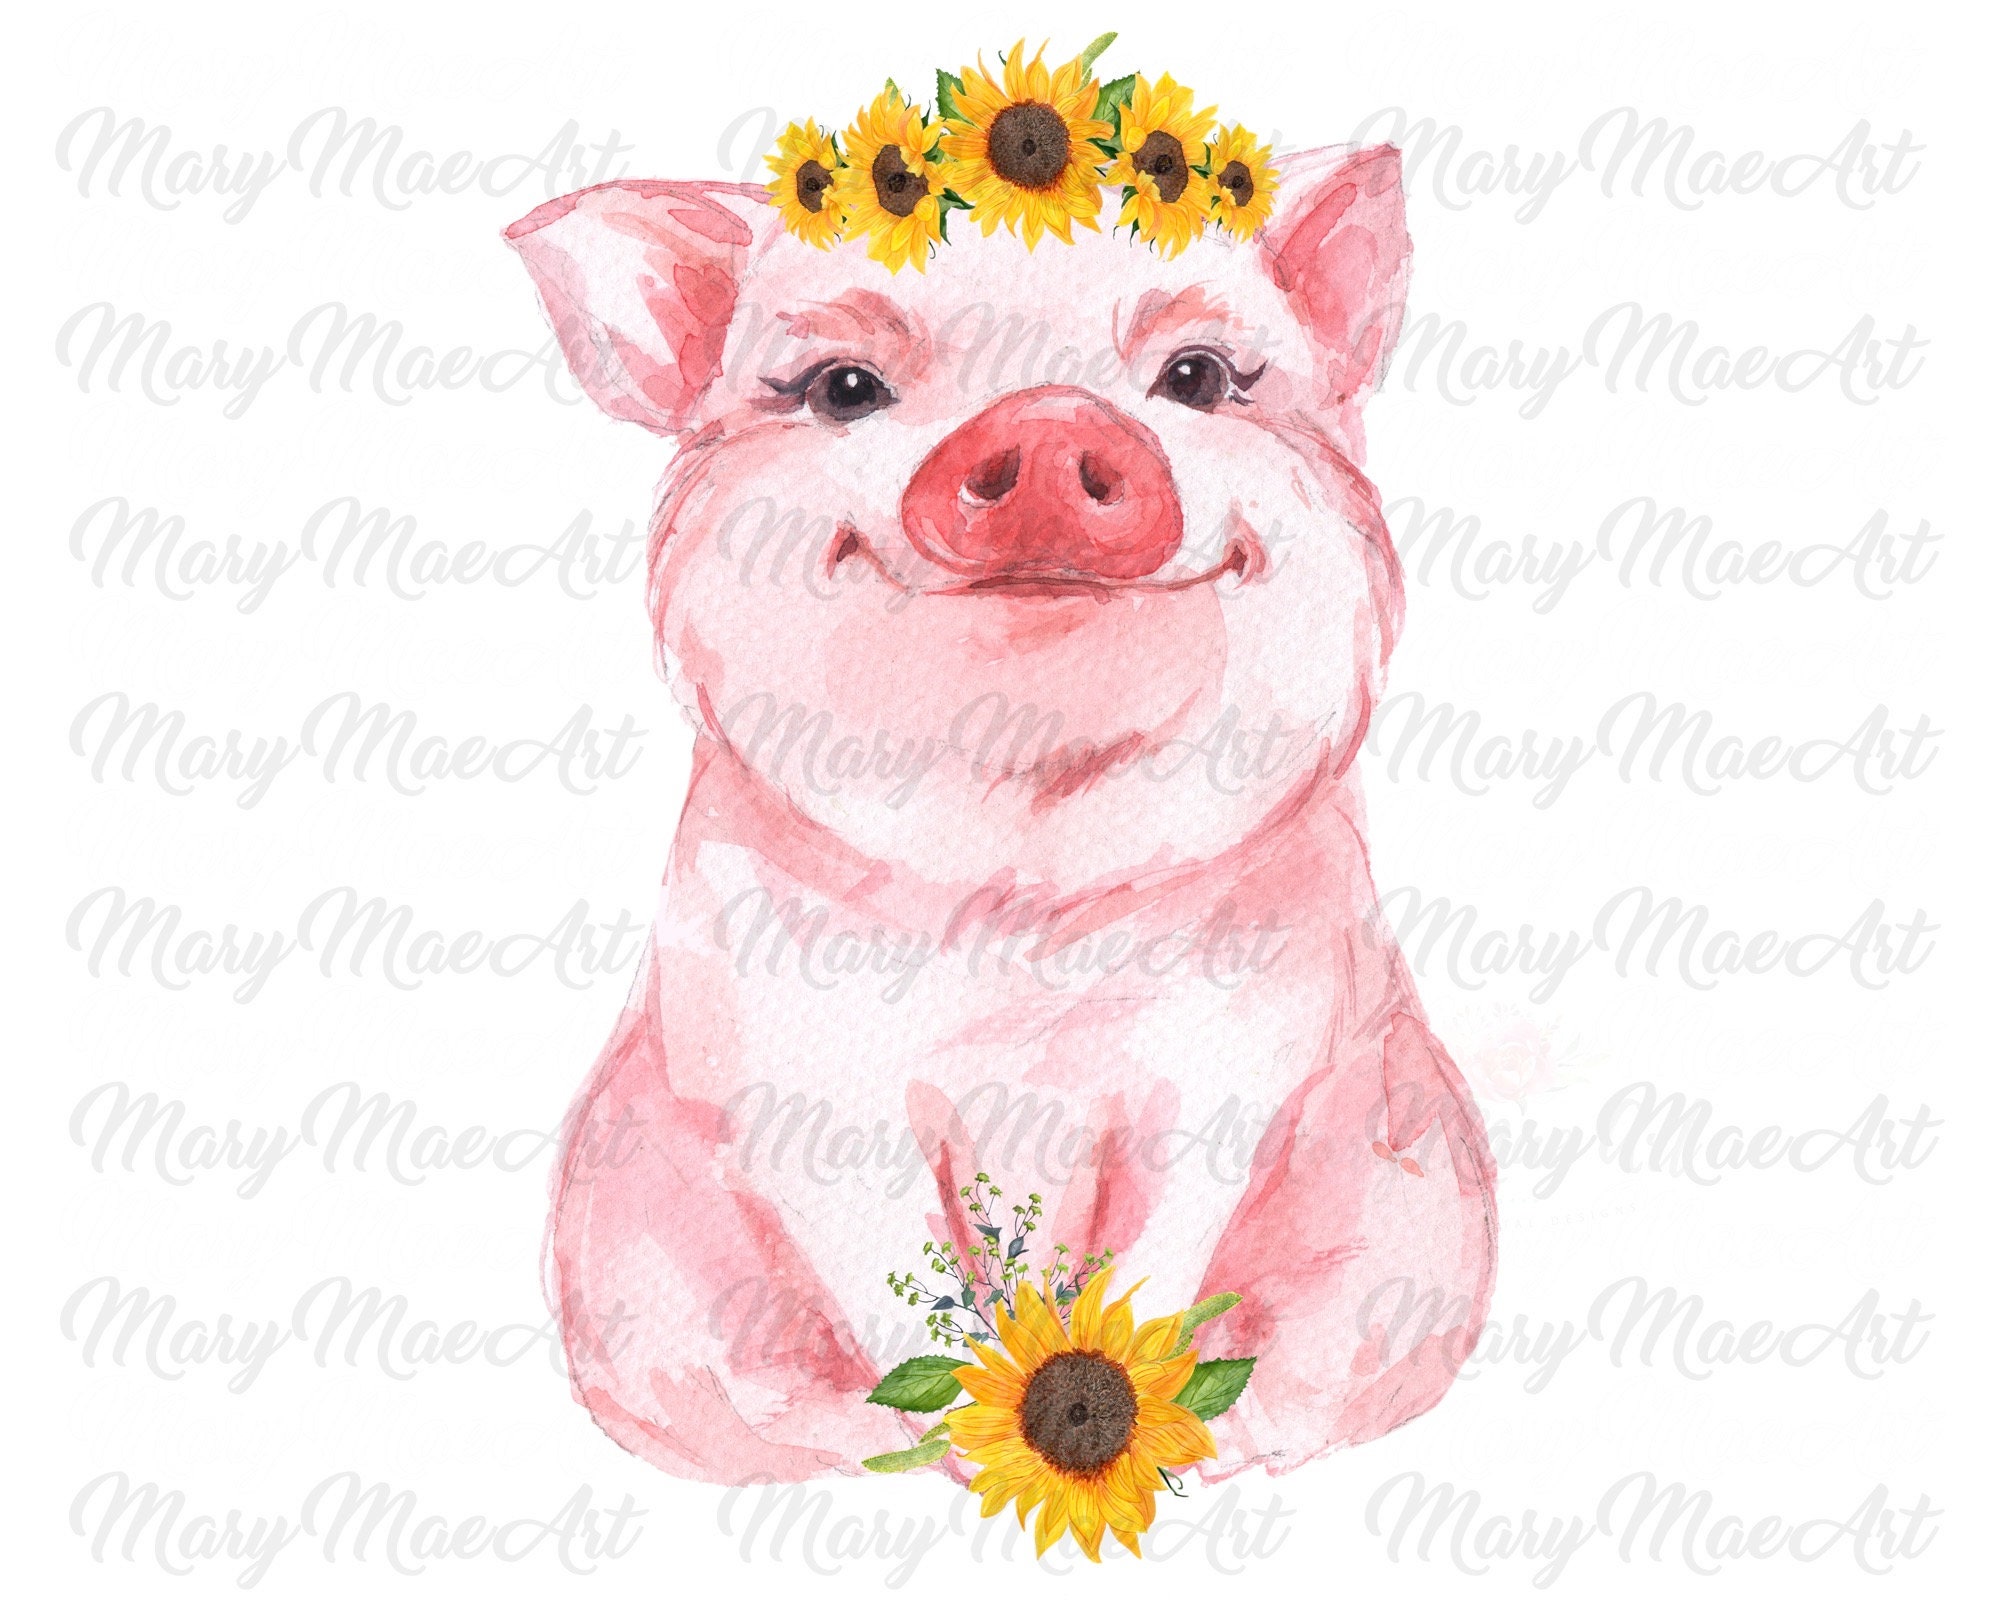 Clover the Sunflower Pig - Limited Edition